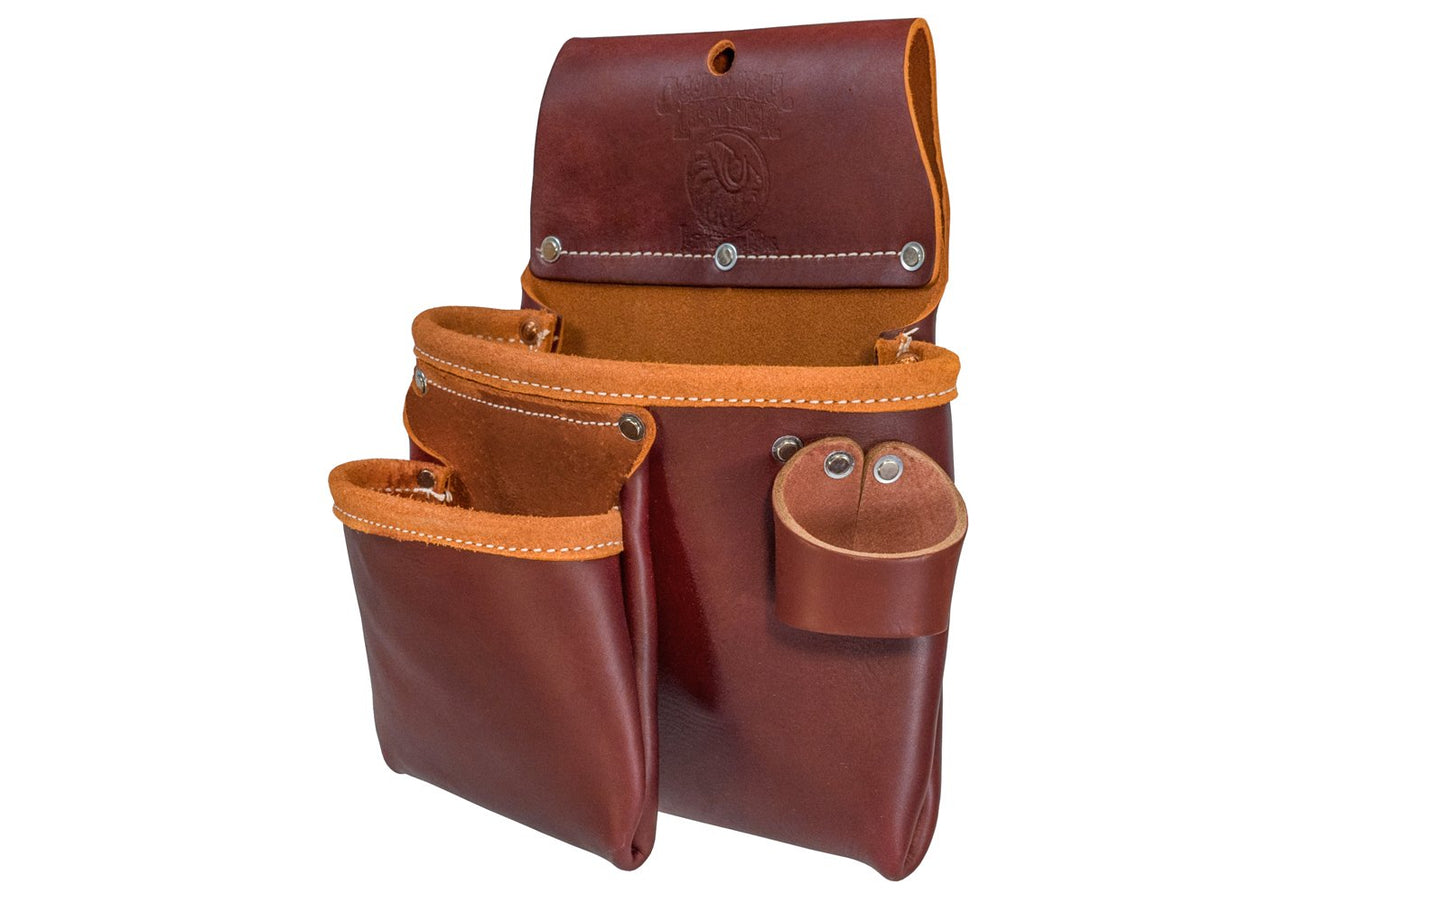 Occidental Leather 2-Pouch Utility Bag ~ 5017 - Made in USA ~ 2-pocket pouch bag - Double Pocket Bag - Made of Genuine Leather - Hand Made - Fits up to a 3" work belt - Holders for pencils, work knife, lumber crayon, chisel, torpedo level, hammer - Model No. 5017 - ProTool Bag